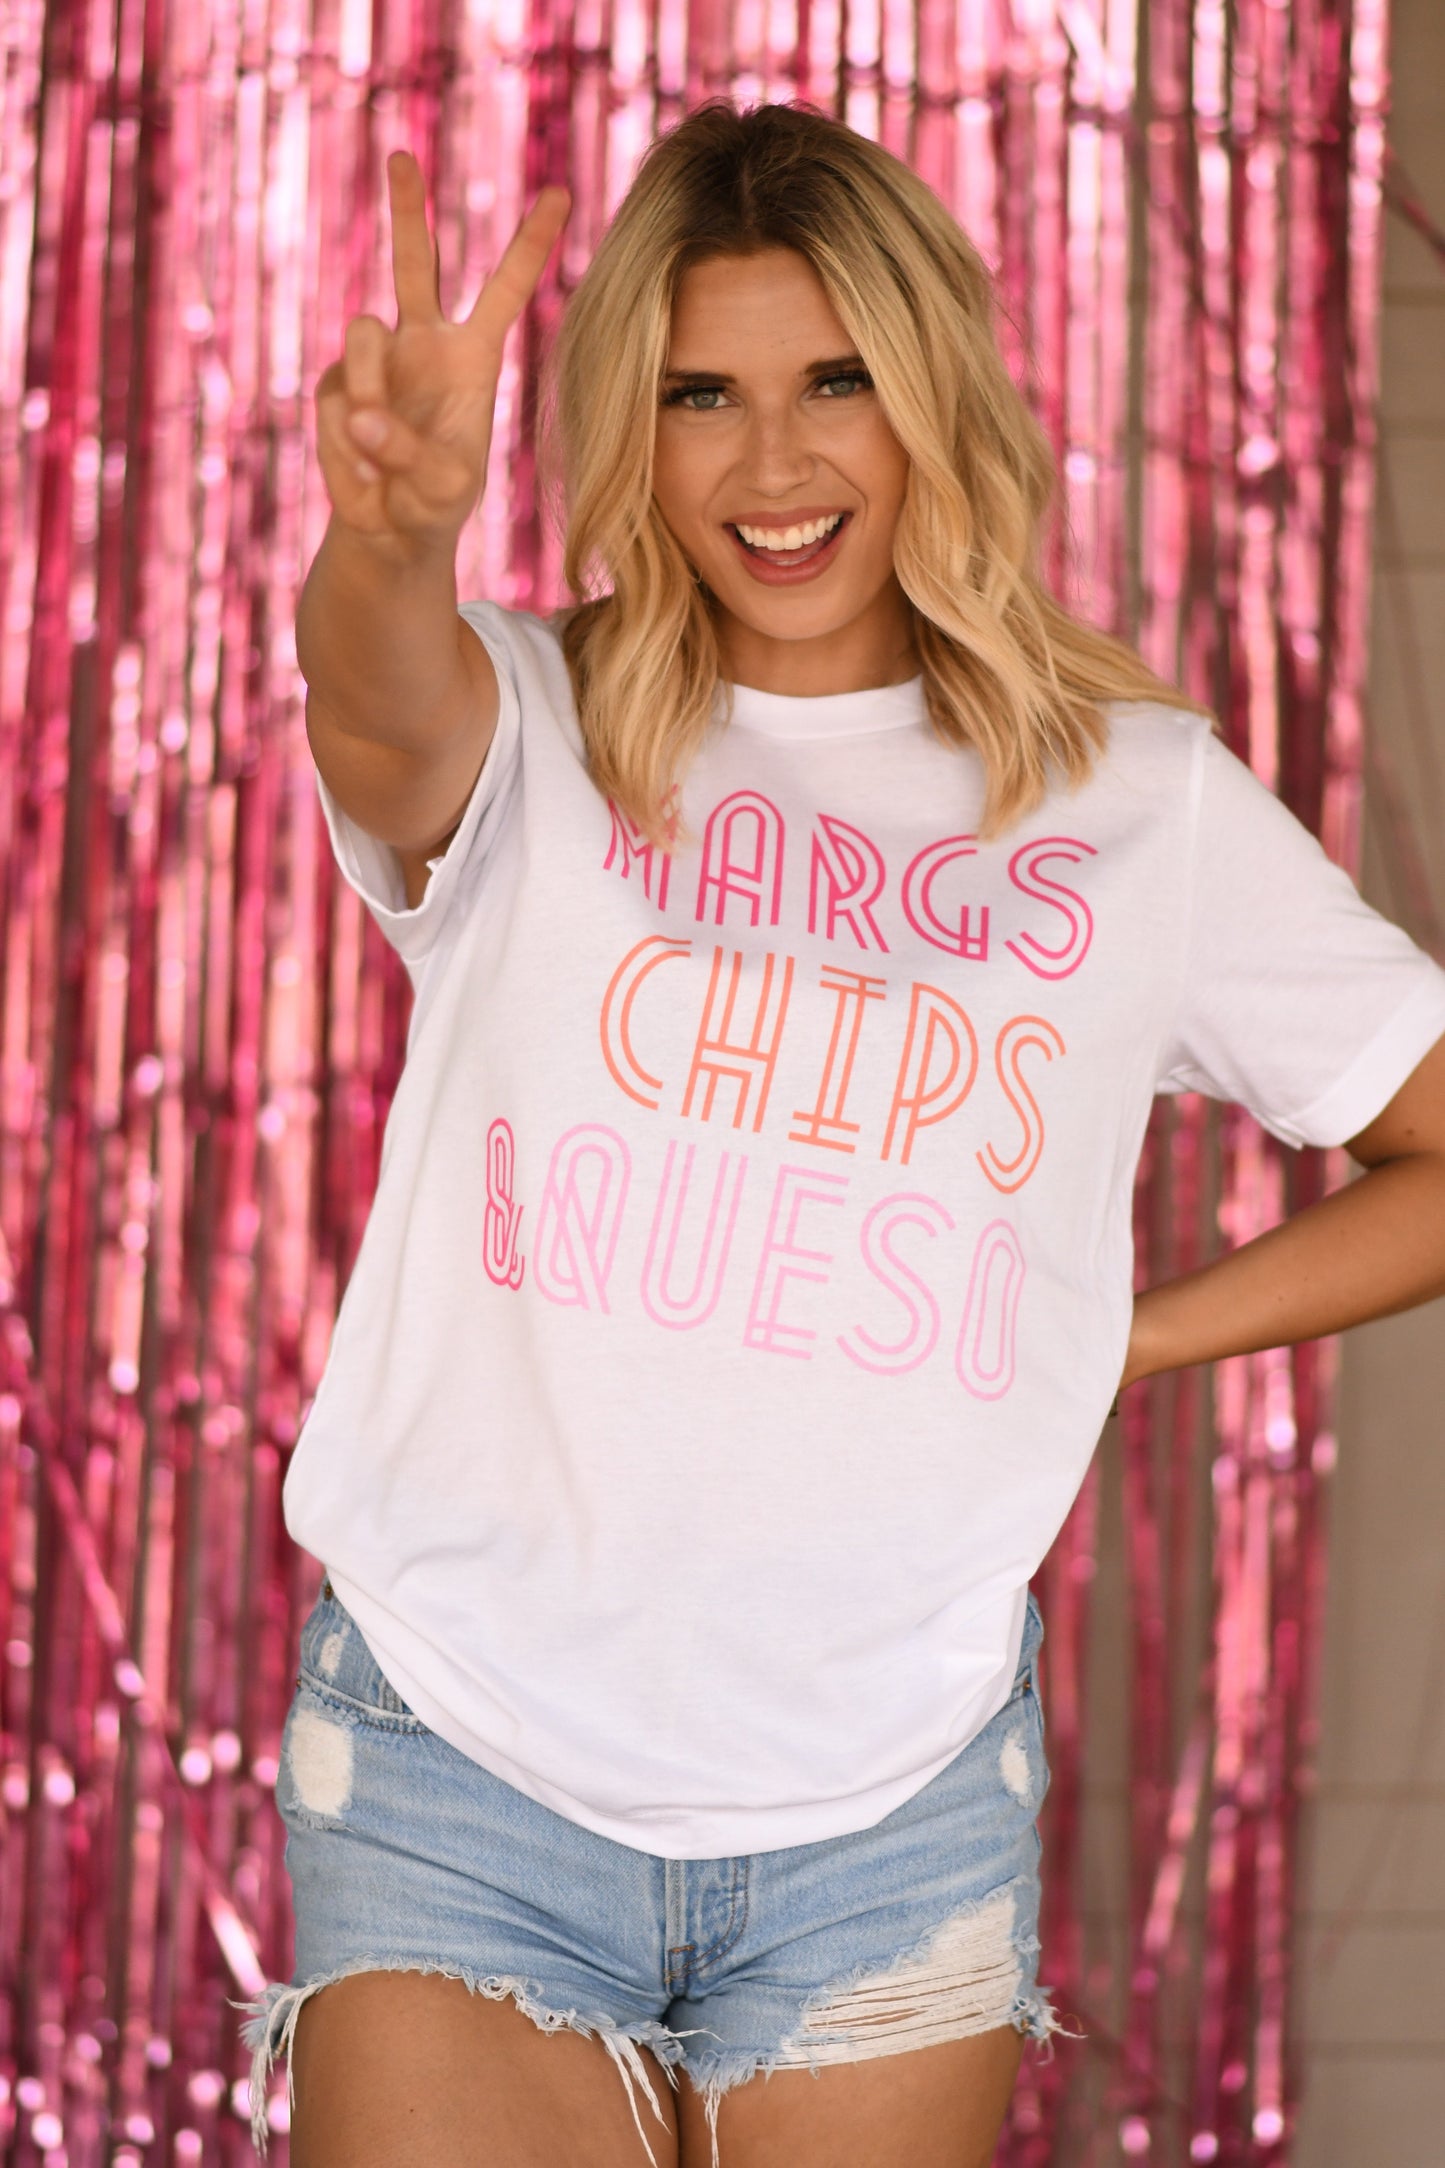 Margs Chips & Queso Tee